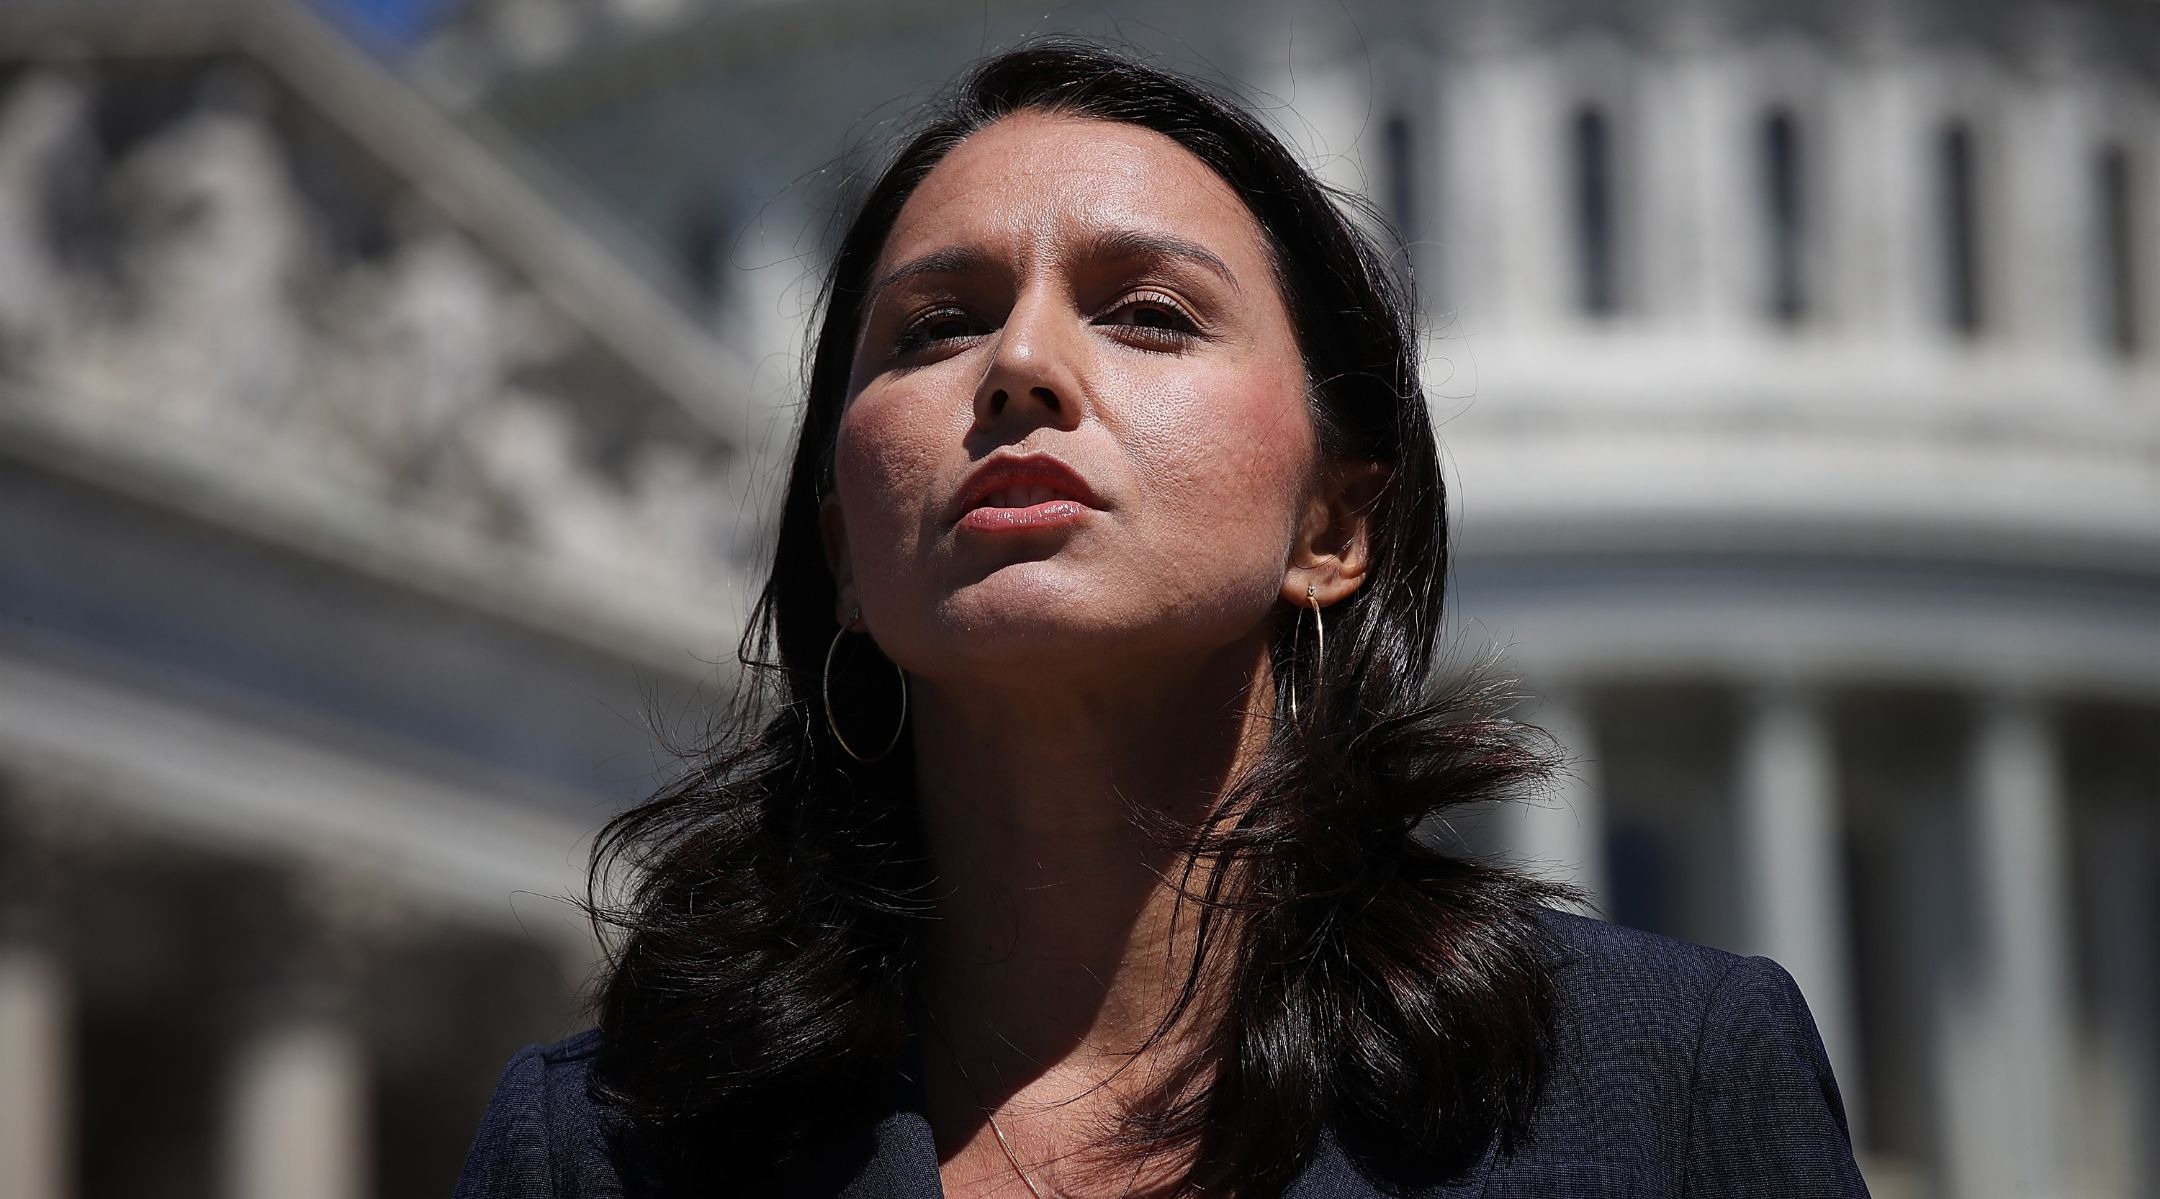 Rep Tulsi Gabbard Who Criticized Israel For Firing On Palestinian Protesters Announces 2020